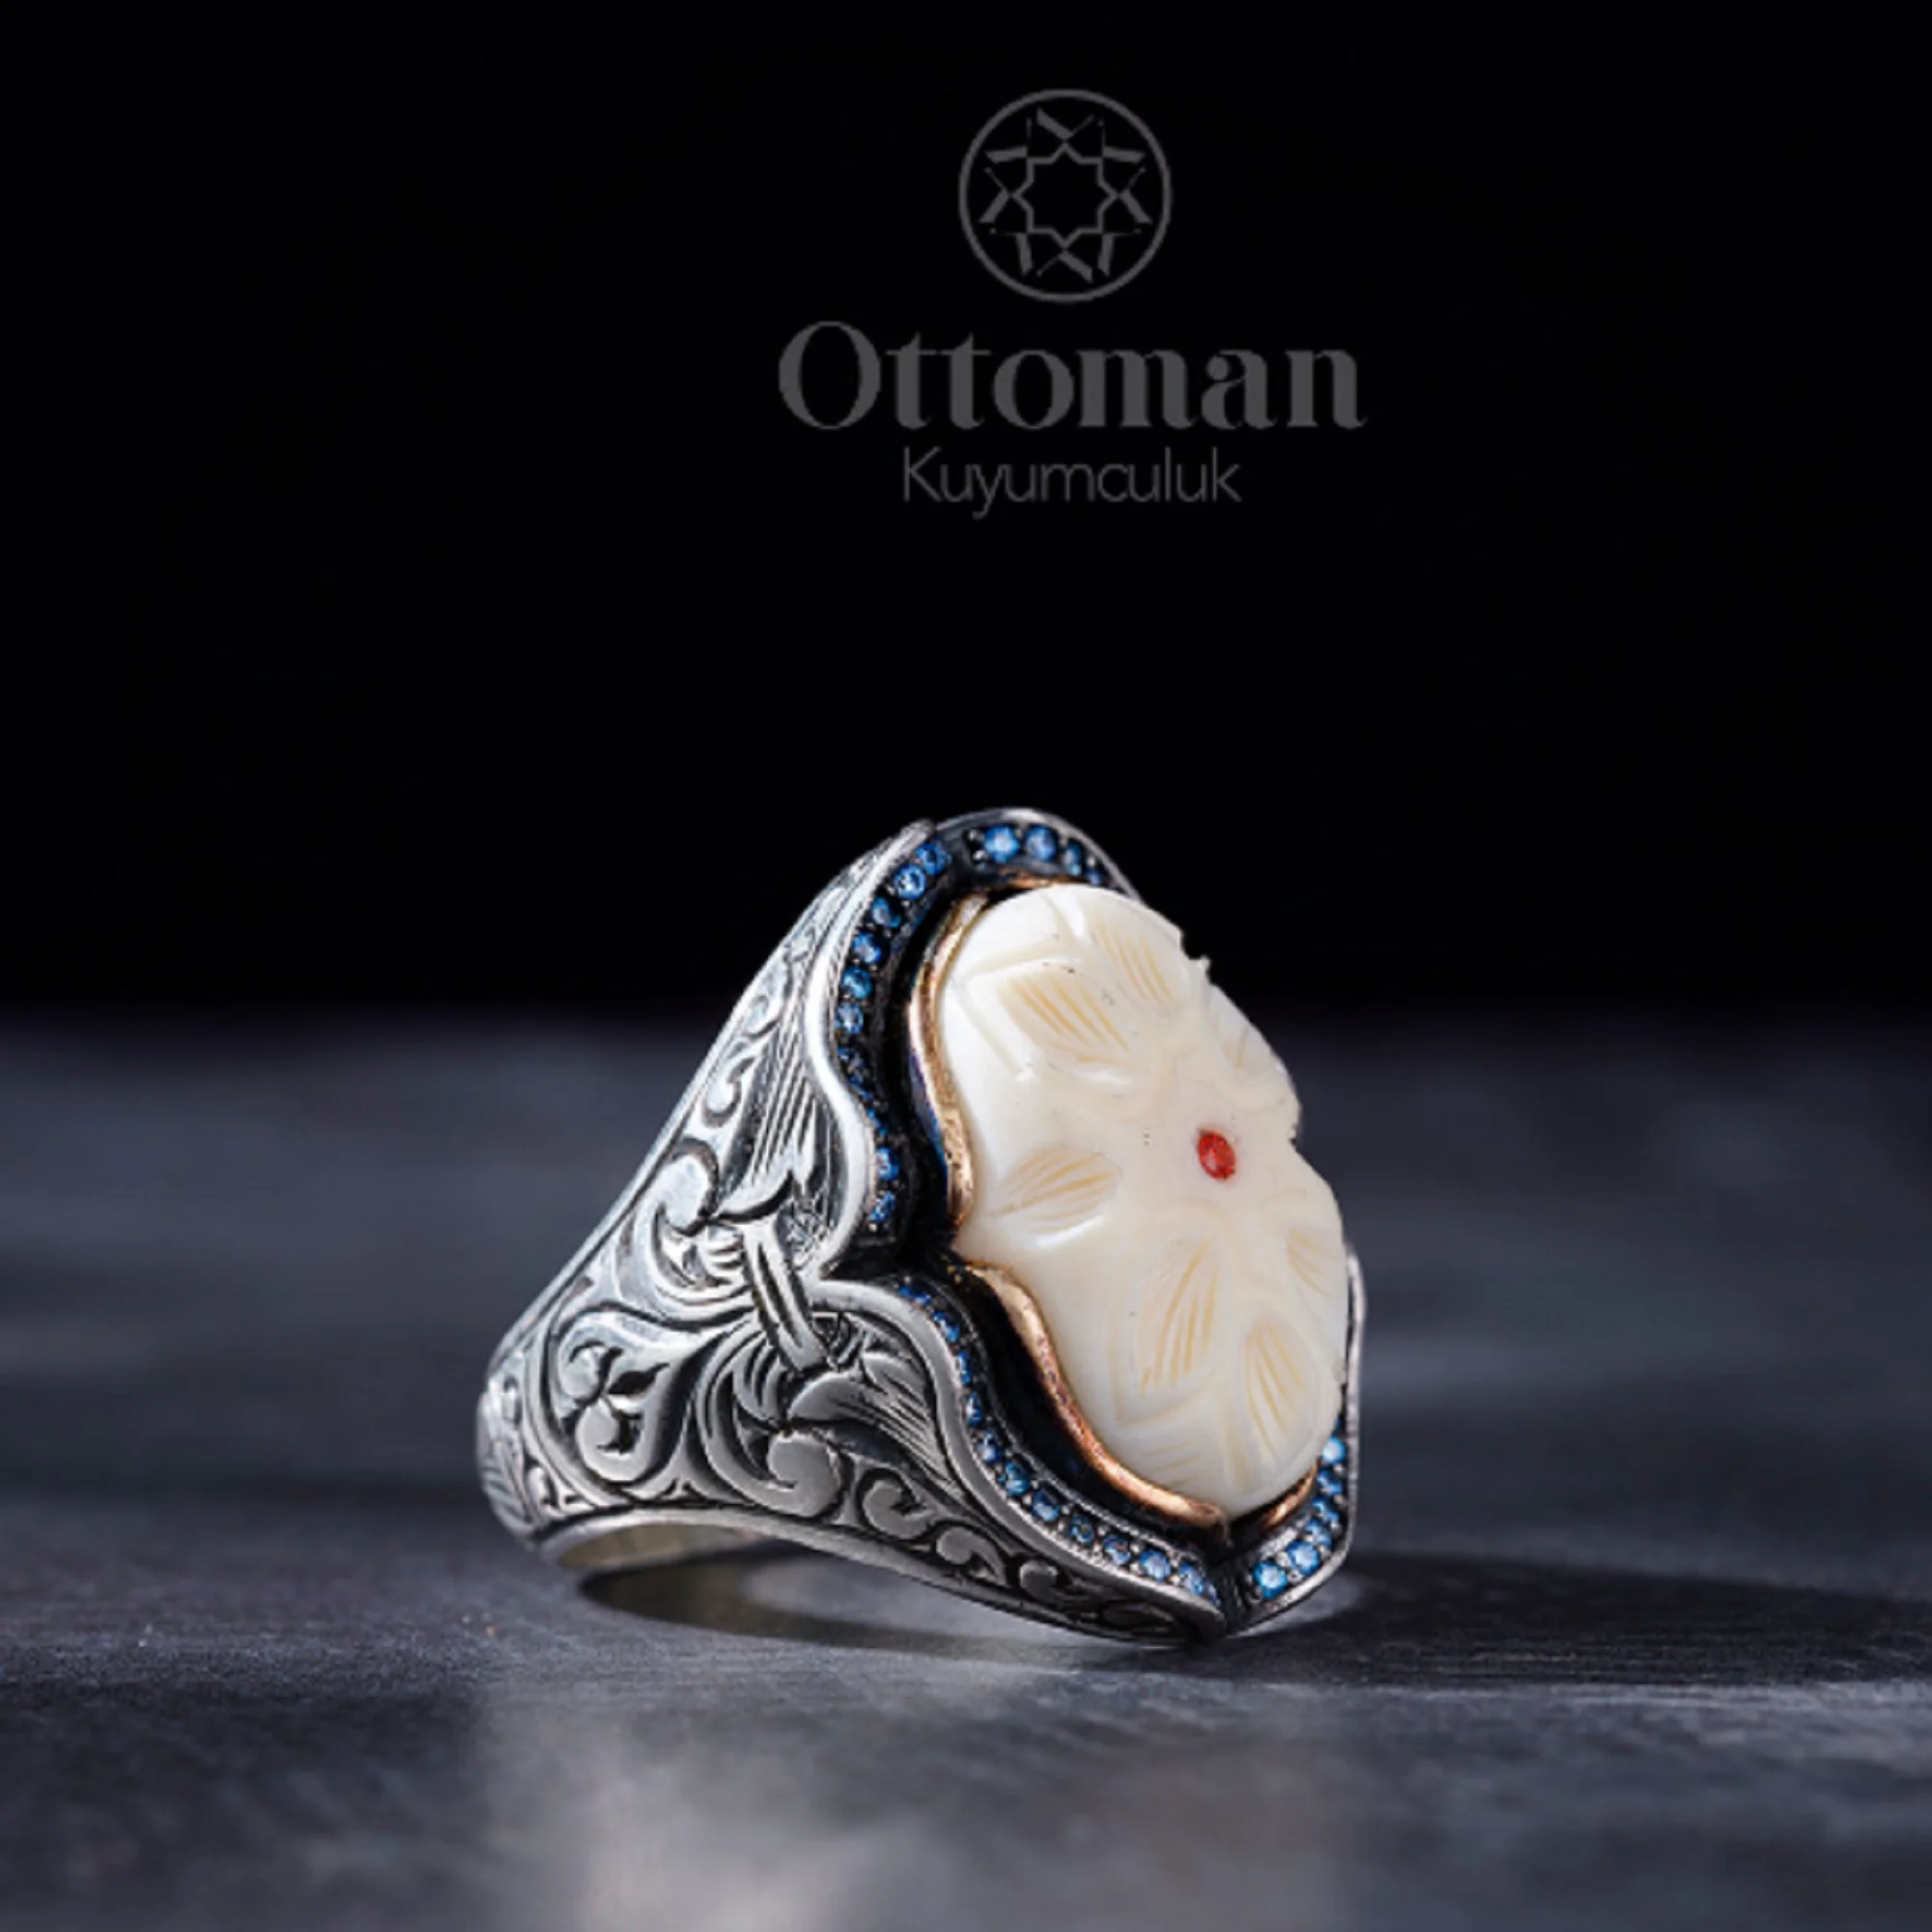 Handmade Ivory Colored Stone 925 Sterling Adjustable Silver Ring, Real Ivory Stone, Custom Patterned Handmade Character Ring